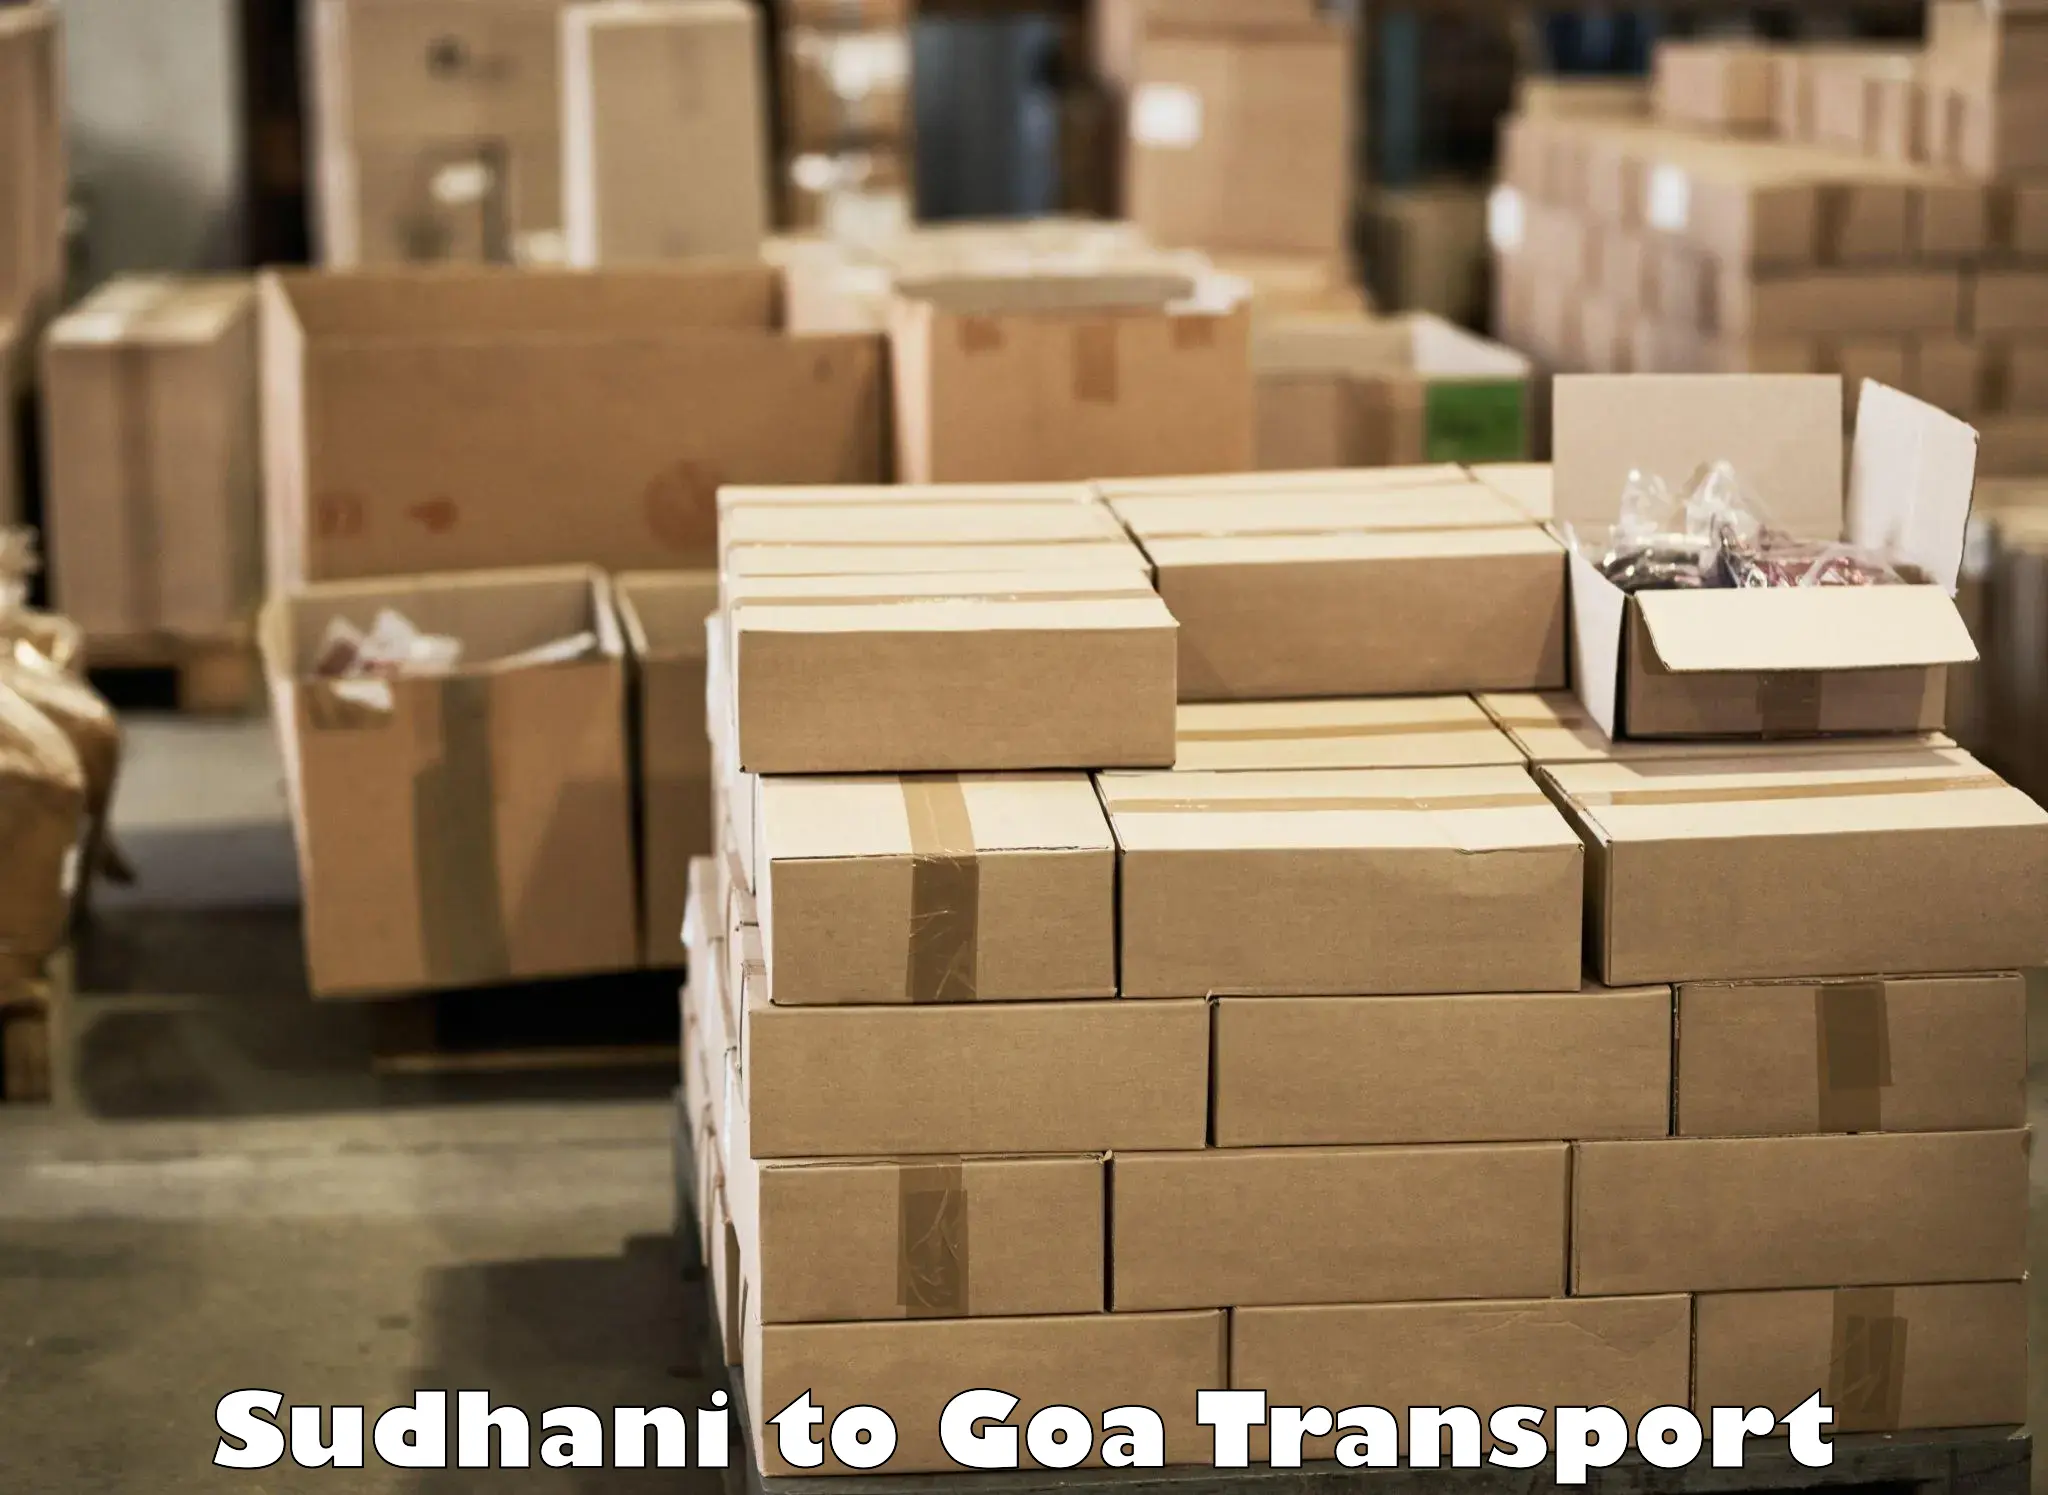 Nearby transport service Sudhani to Goa